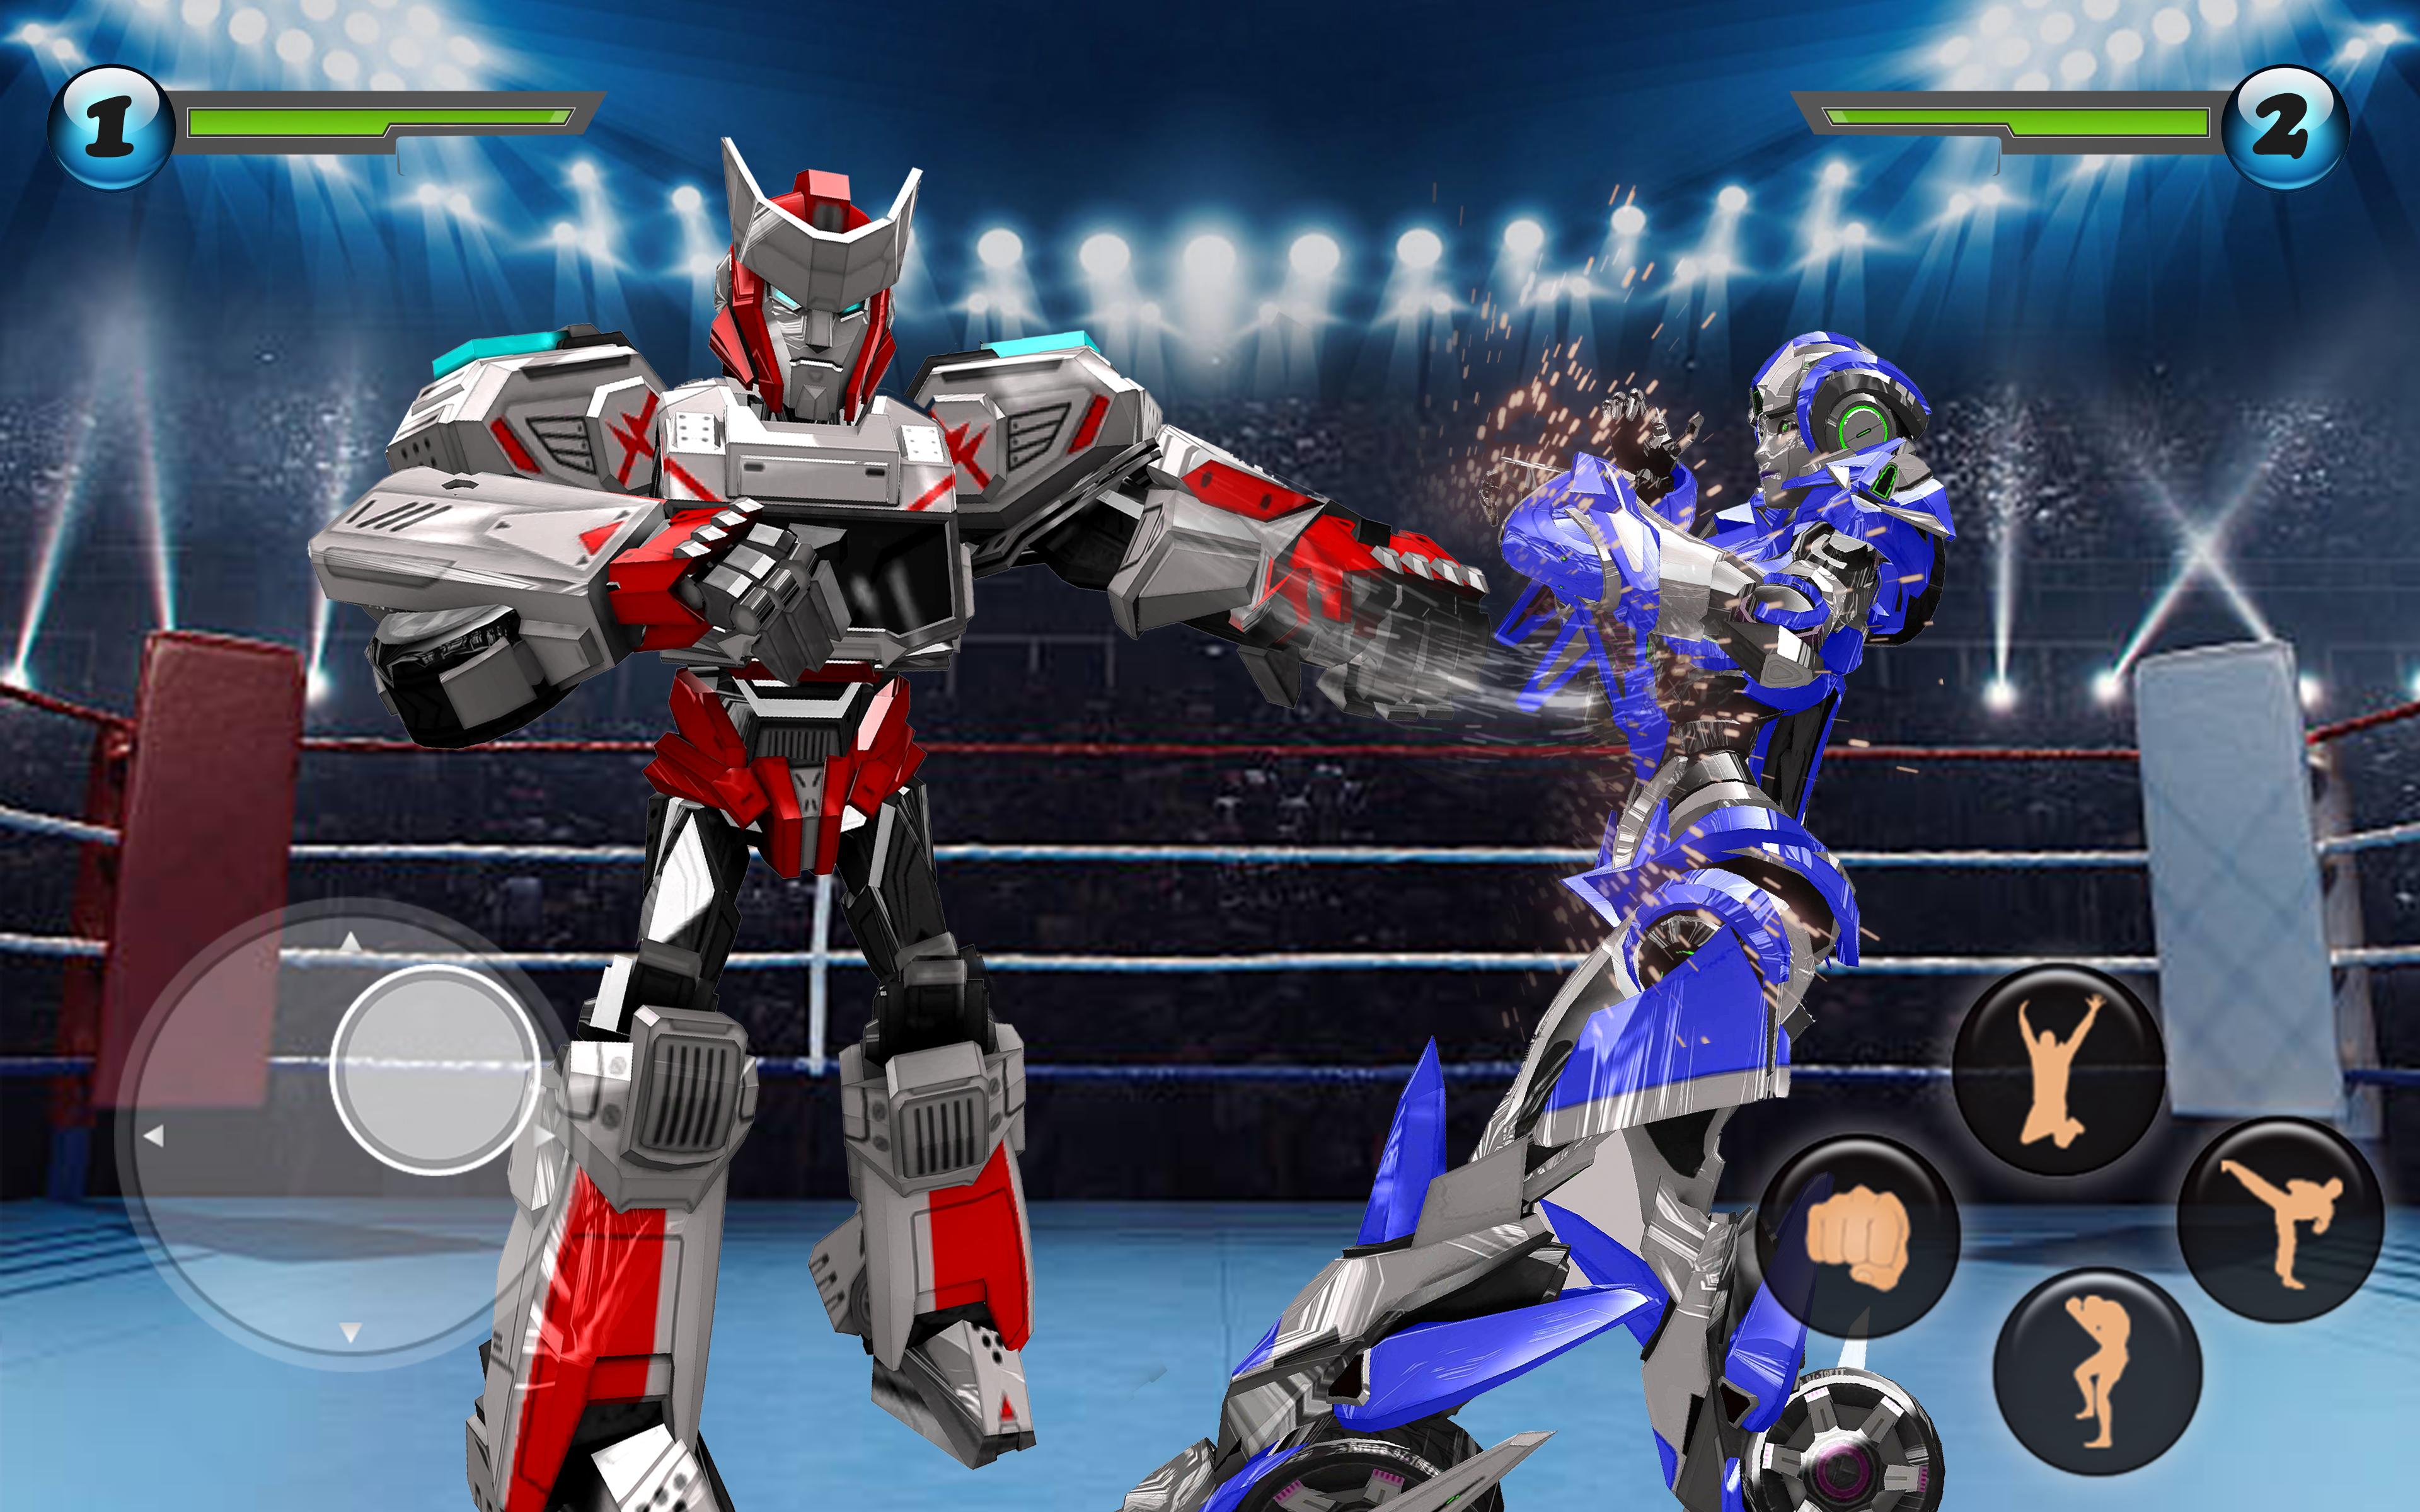 Miami Town Grand Robots Fighting 2019 for Android - APK Download